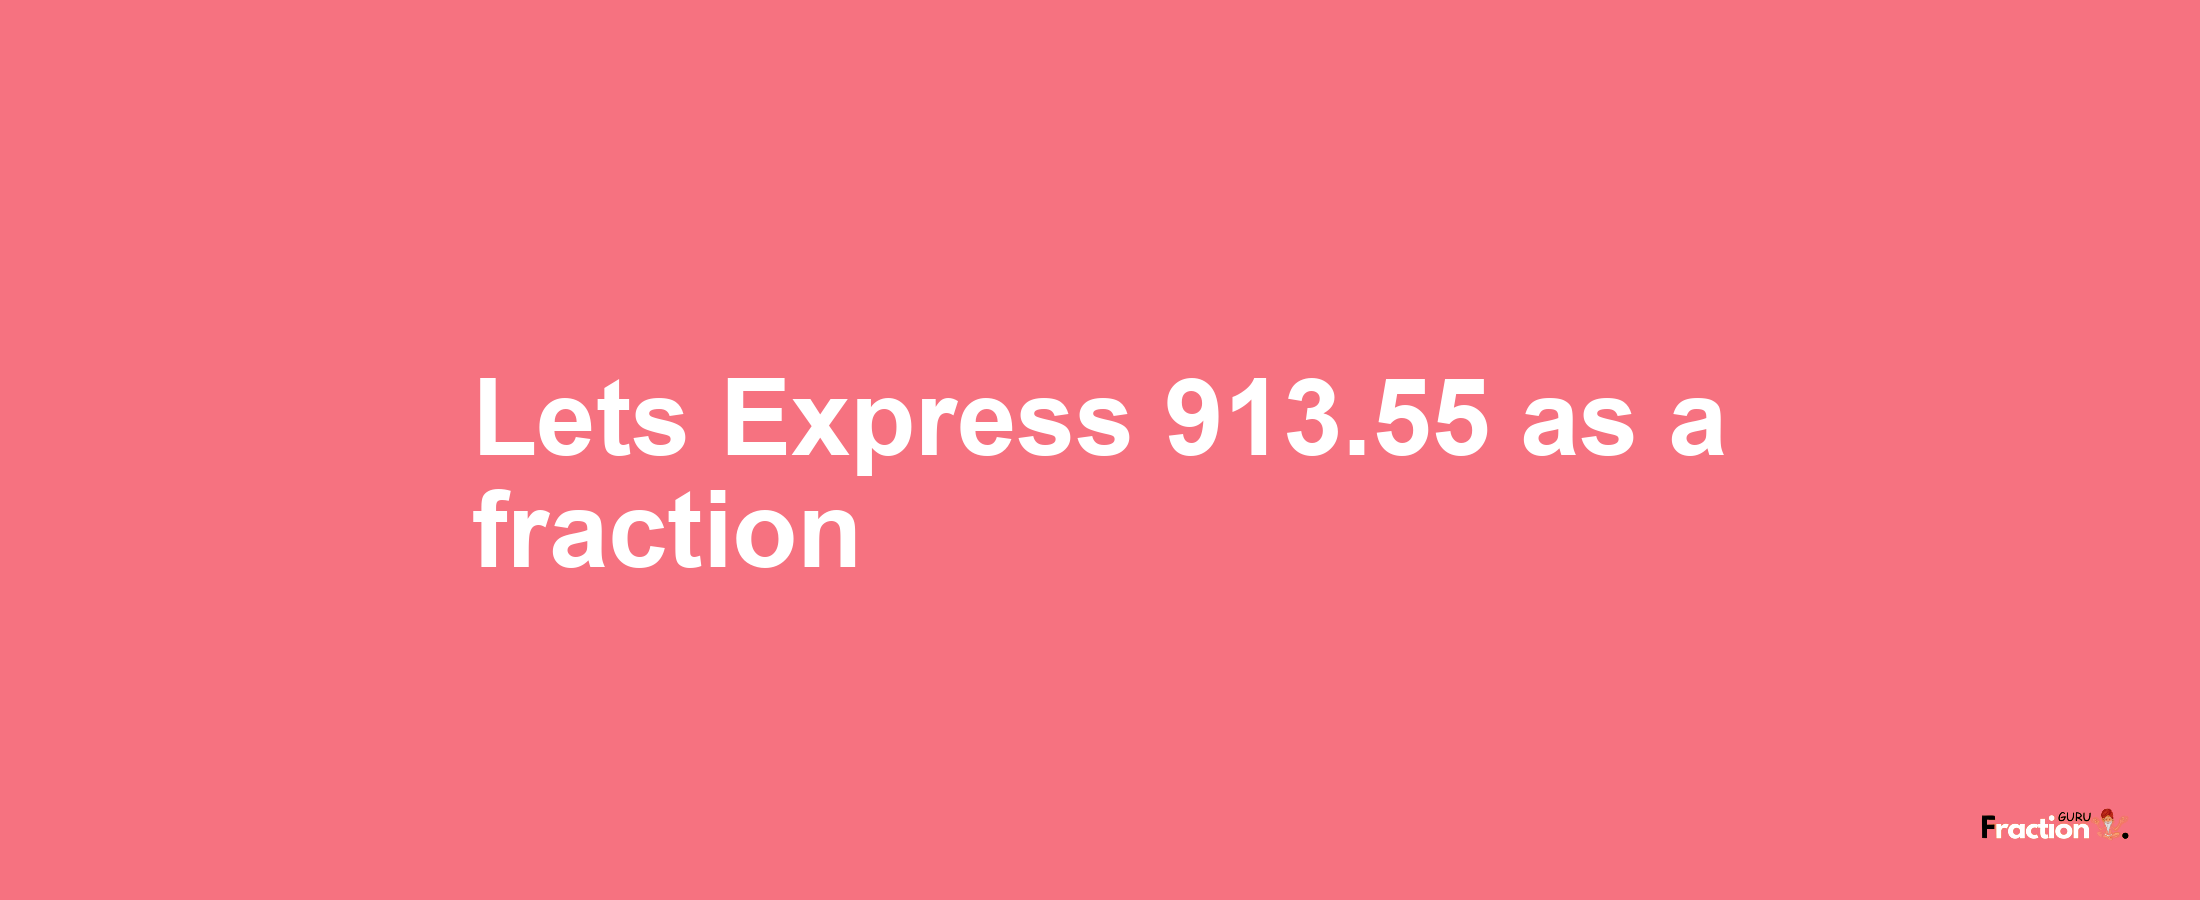 Lets Express 913.55 as afraction